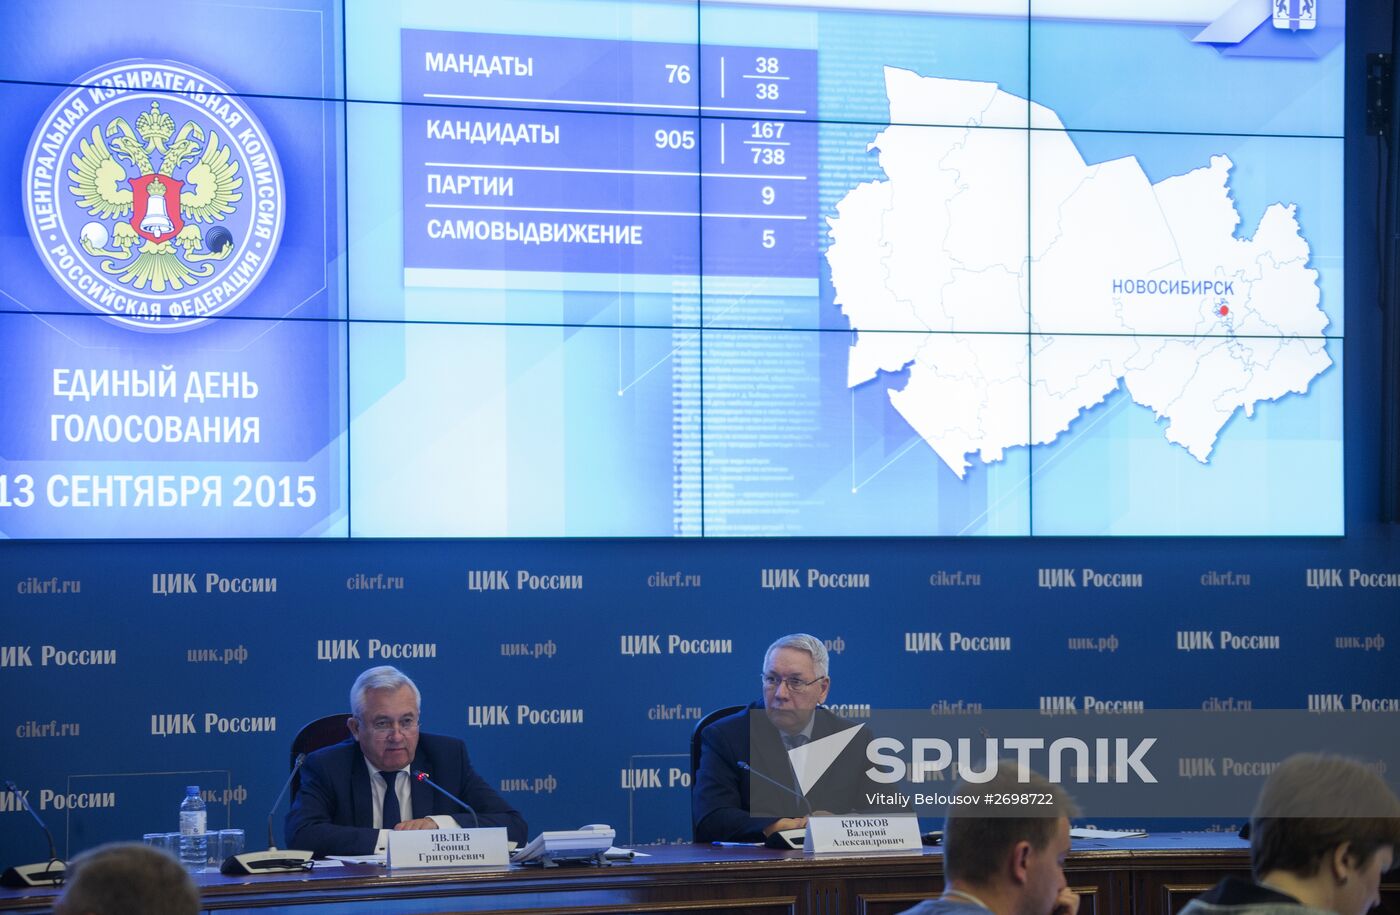 Elections in Russia’s constituent entities